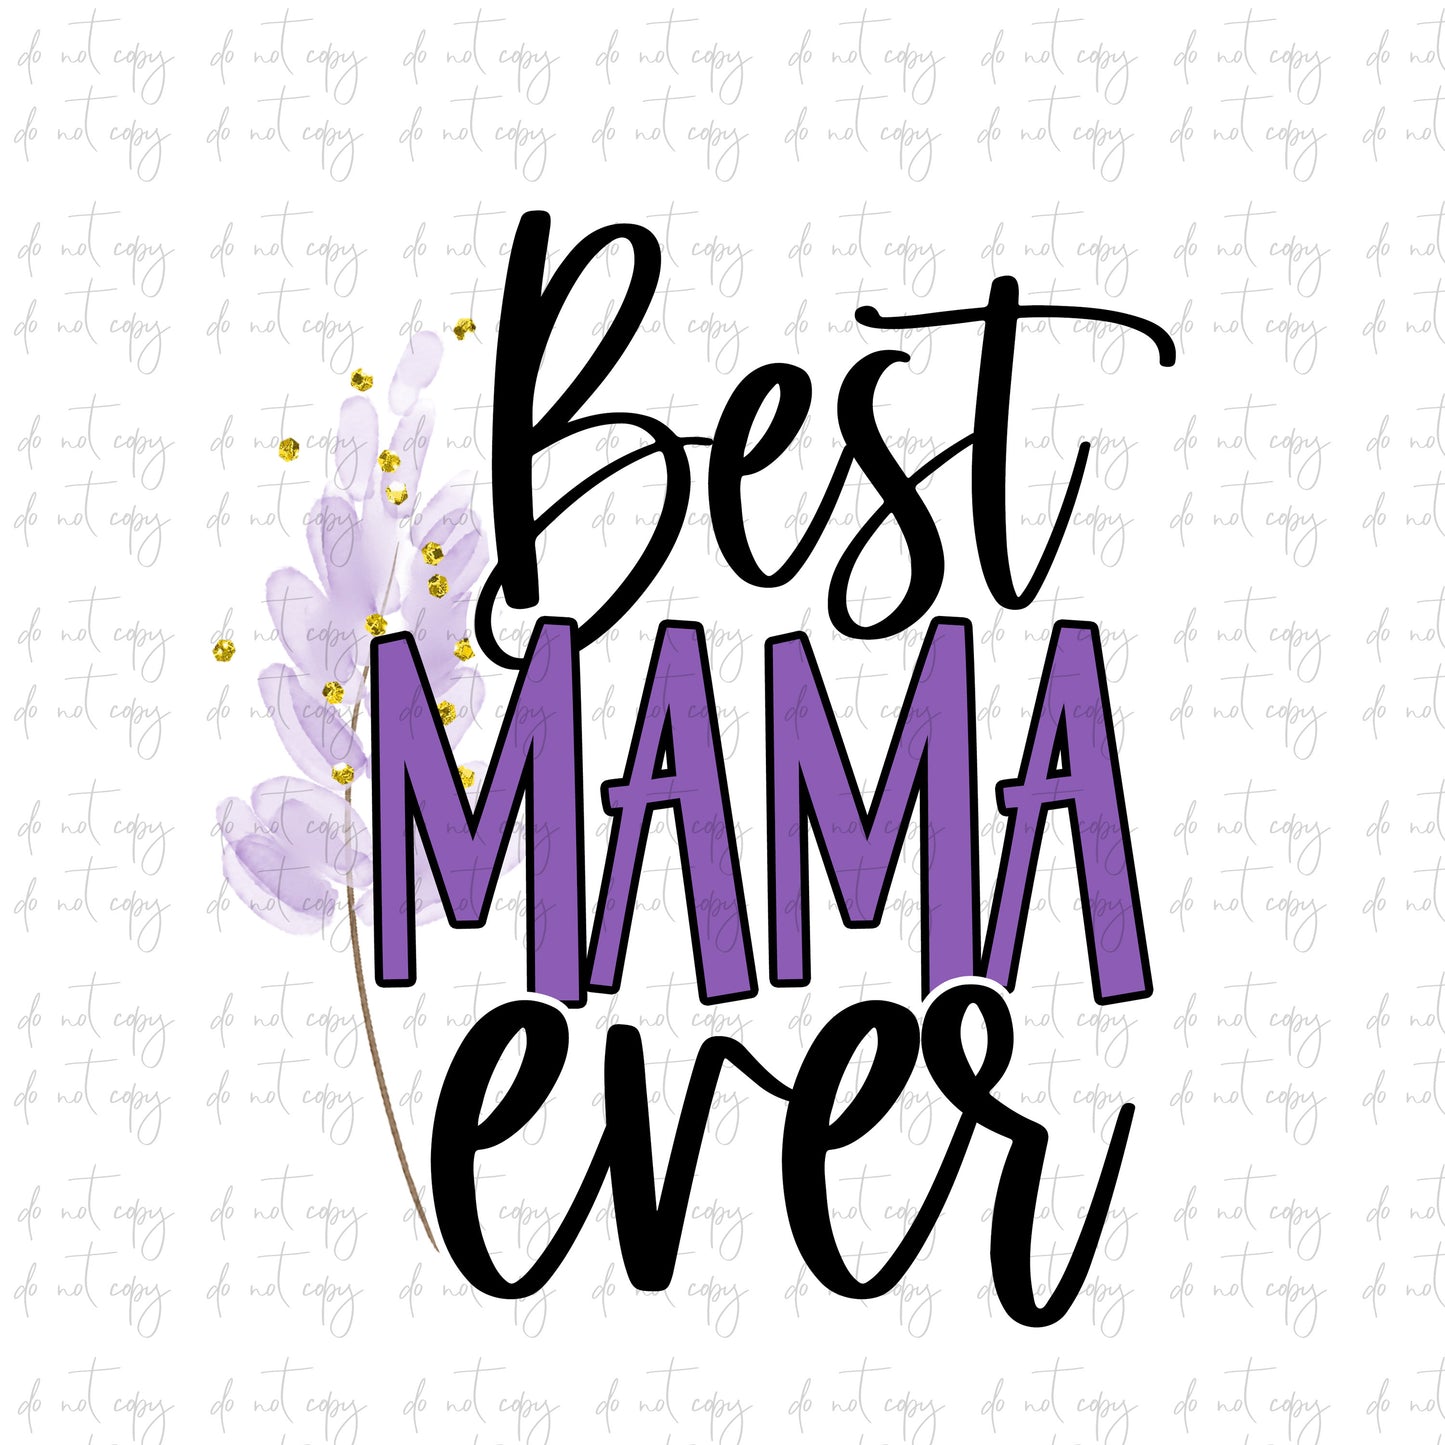 Best mama Ever Sublimation png file, Best mama Ever Sublimation Download, Best mama Ever PNG File Instant Download purple